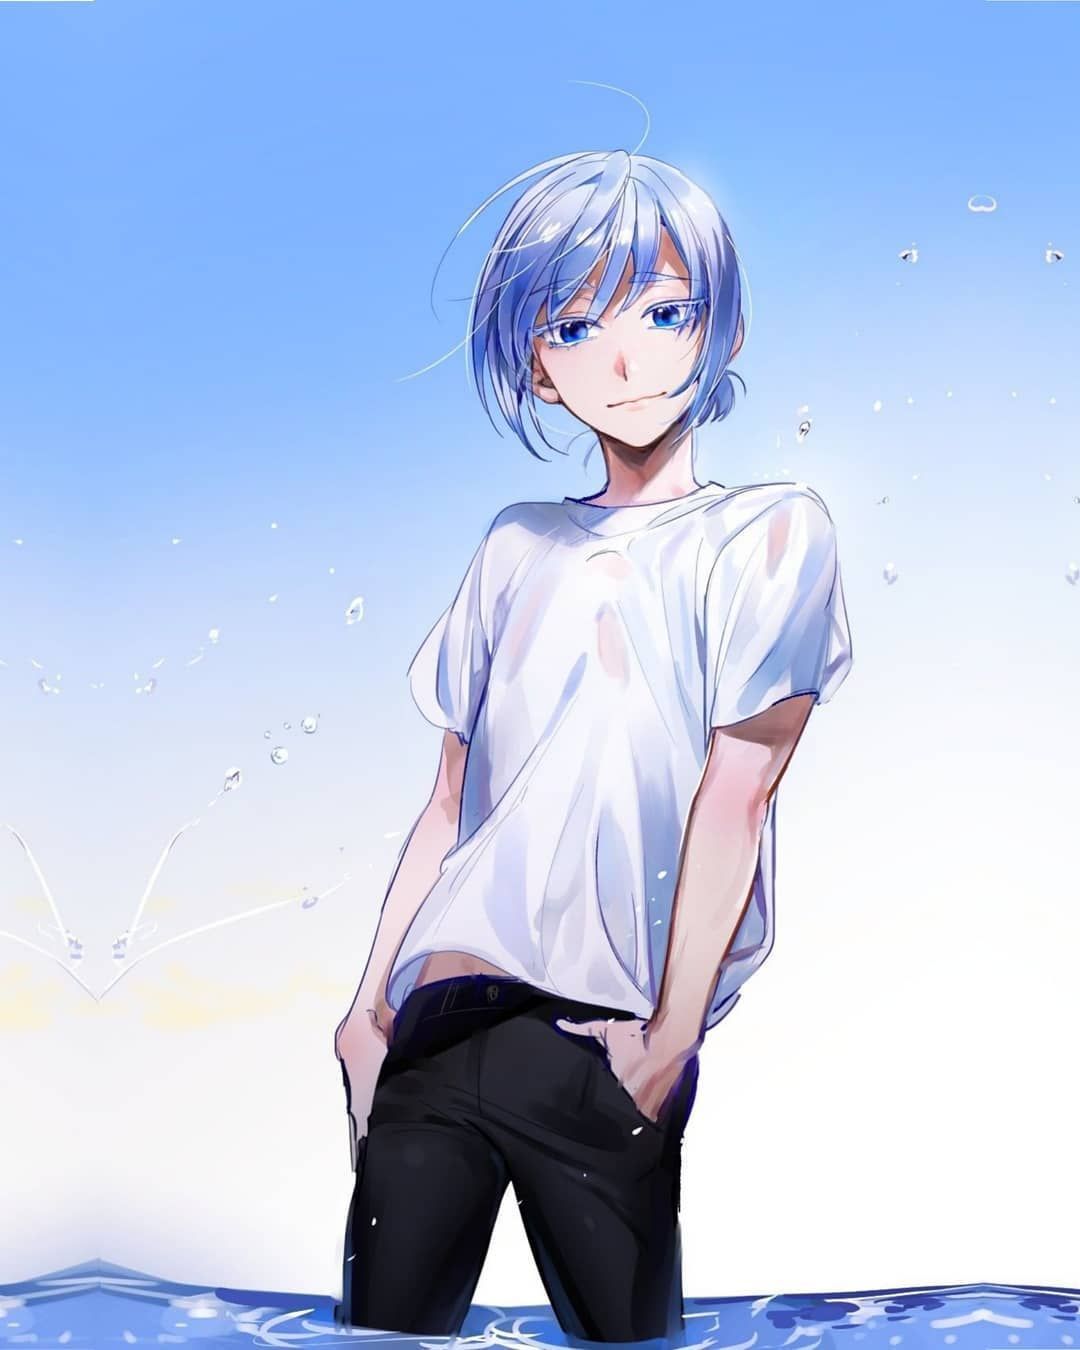 Download Cute Anime Guys Hot Anime Boy Anime Sexy Anime Boys  Anime  Boy Blue Hair PNG Image with No Background  PNGkeycom